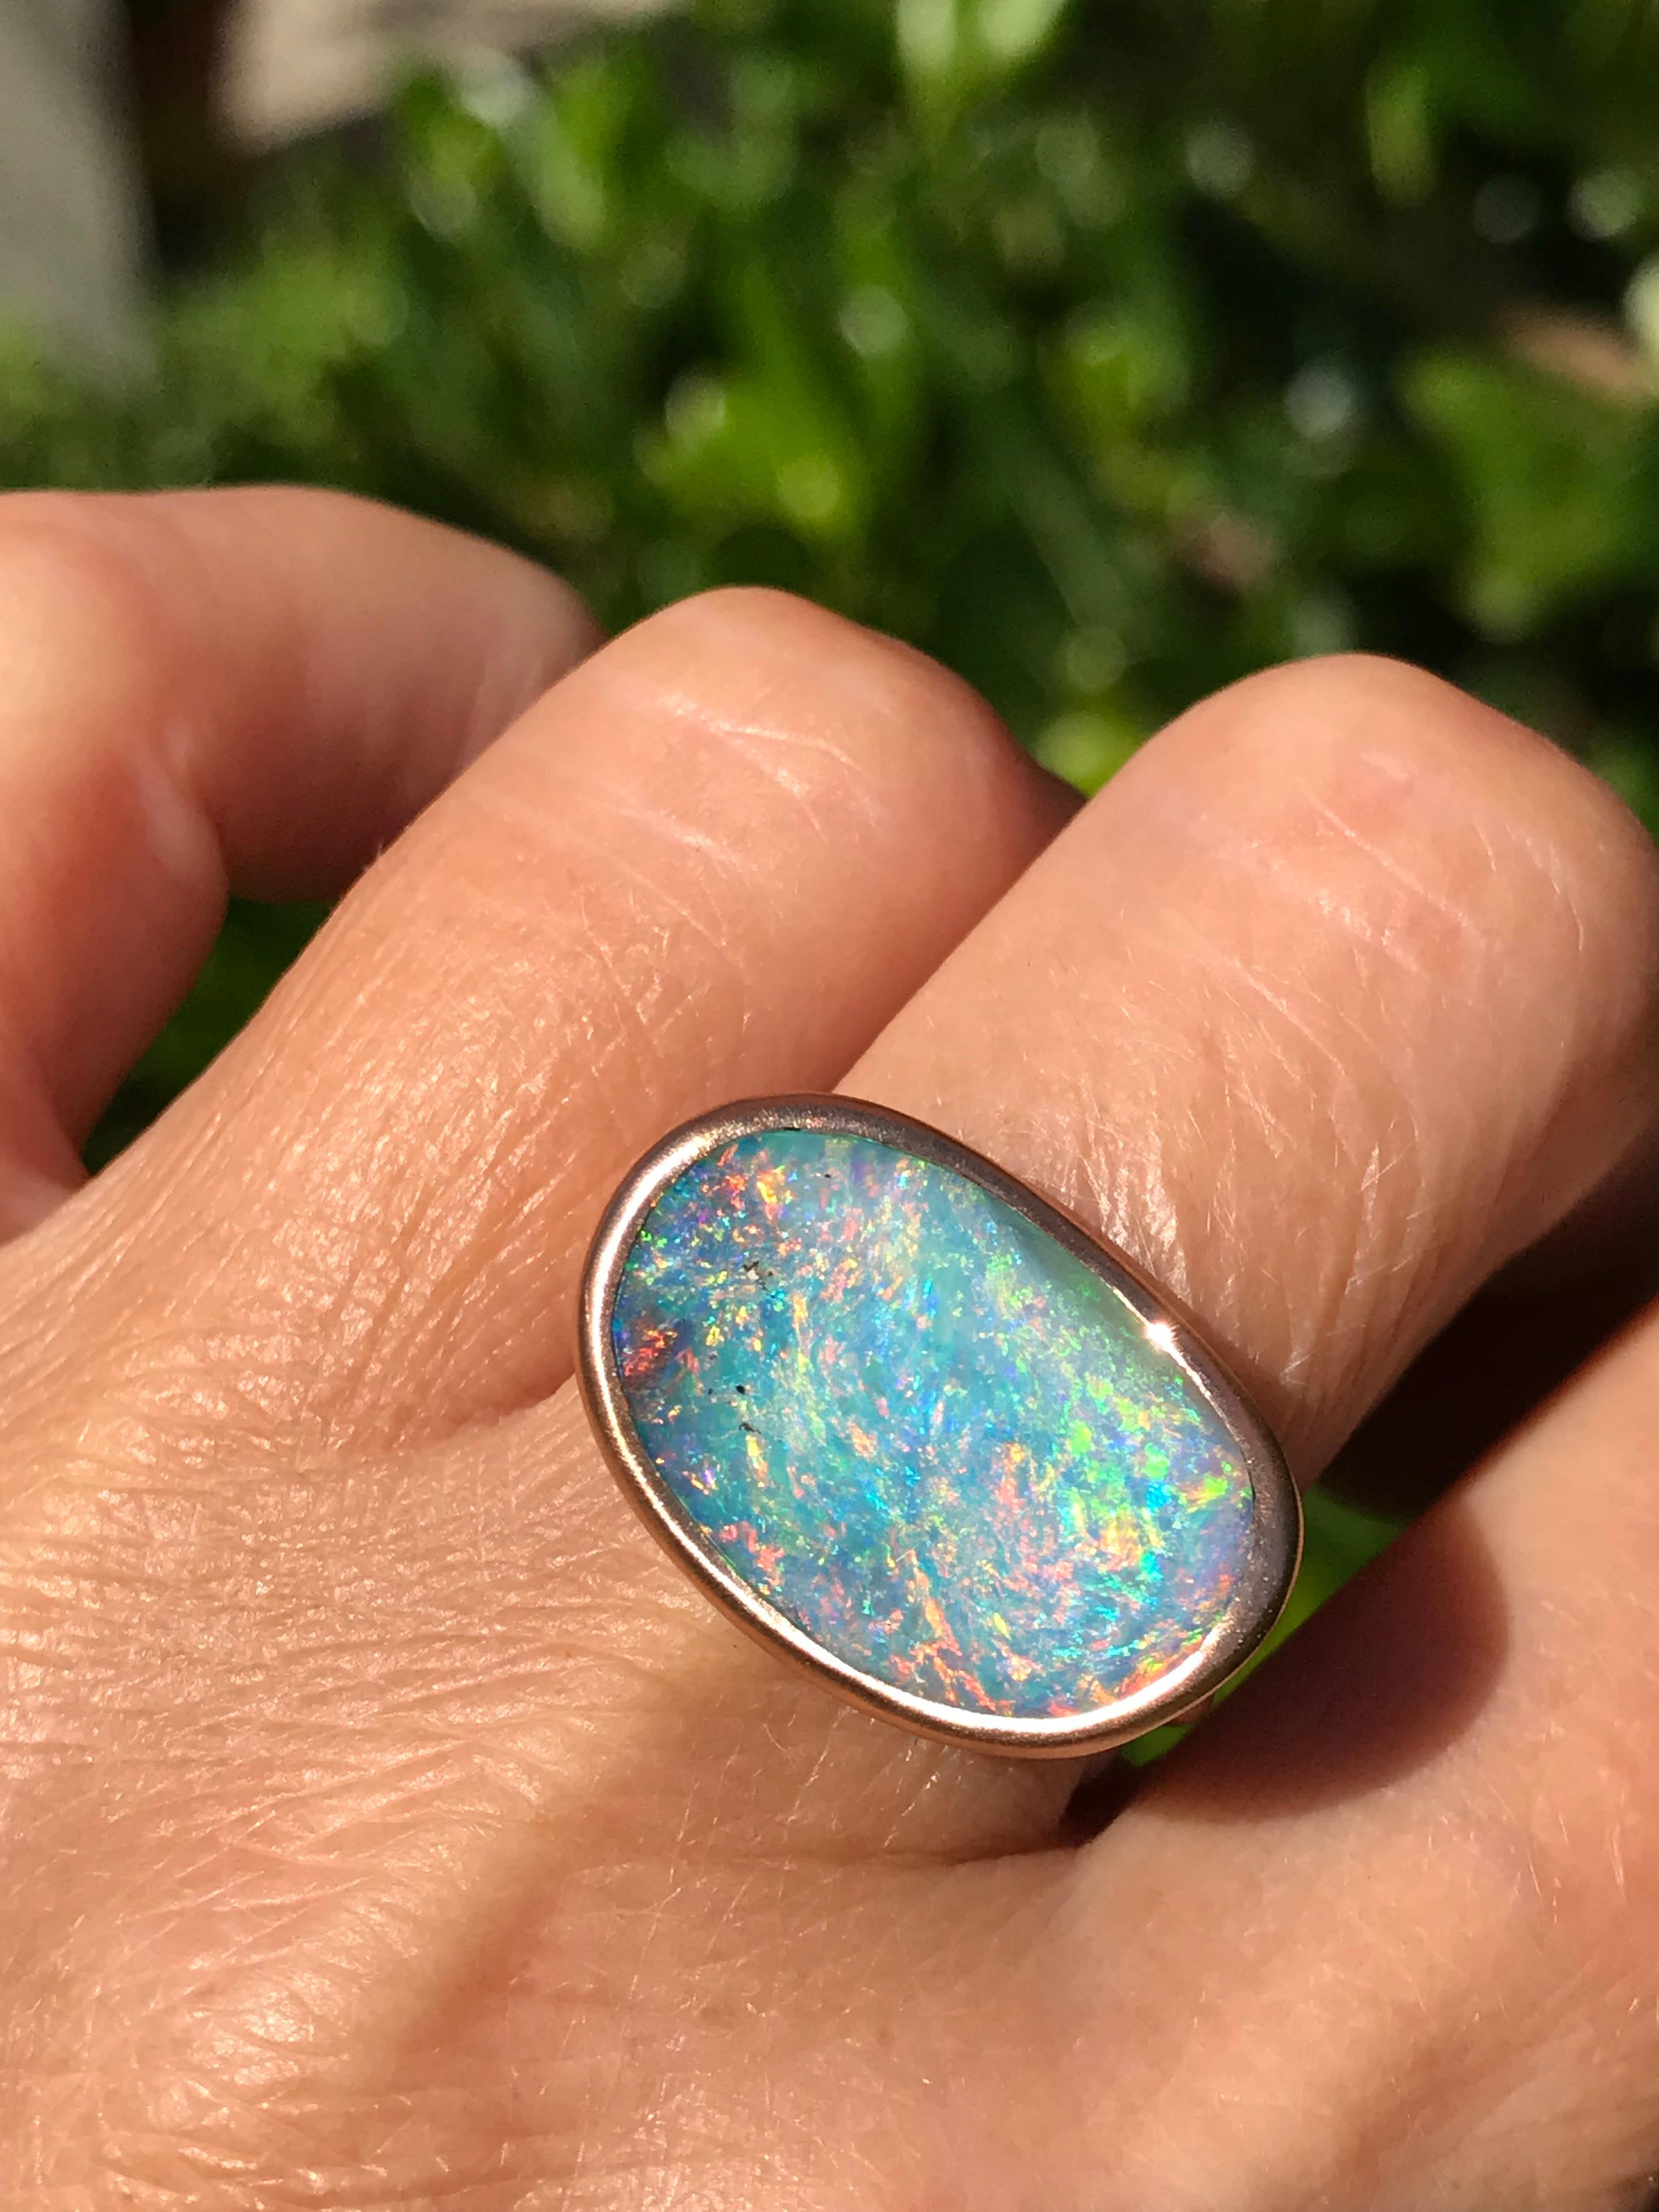 Dalben design 18k rose gold satin finishing ring with a  9,7 carat bezel-set organic shape magnificent Queensland mine Australian boulder opal . 
The Australian Opal have blue , pink and green spots.
Ring size US  7 1/4-  - EU 55- re-sizable to most